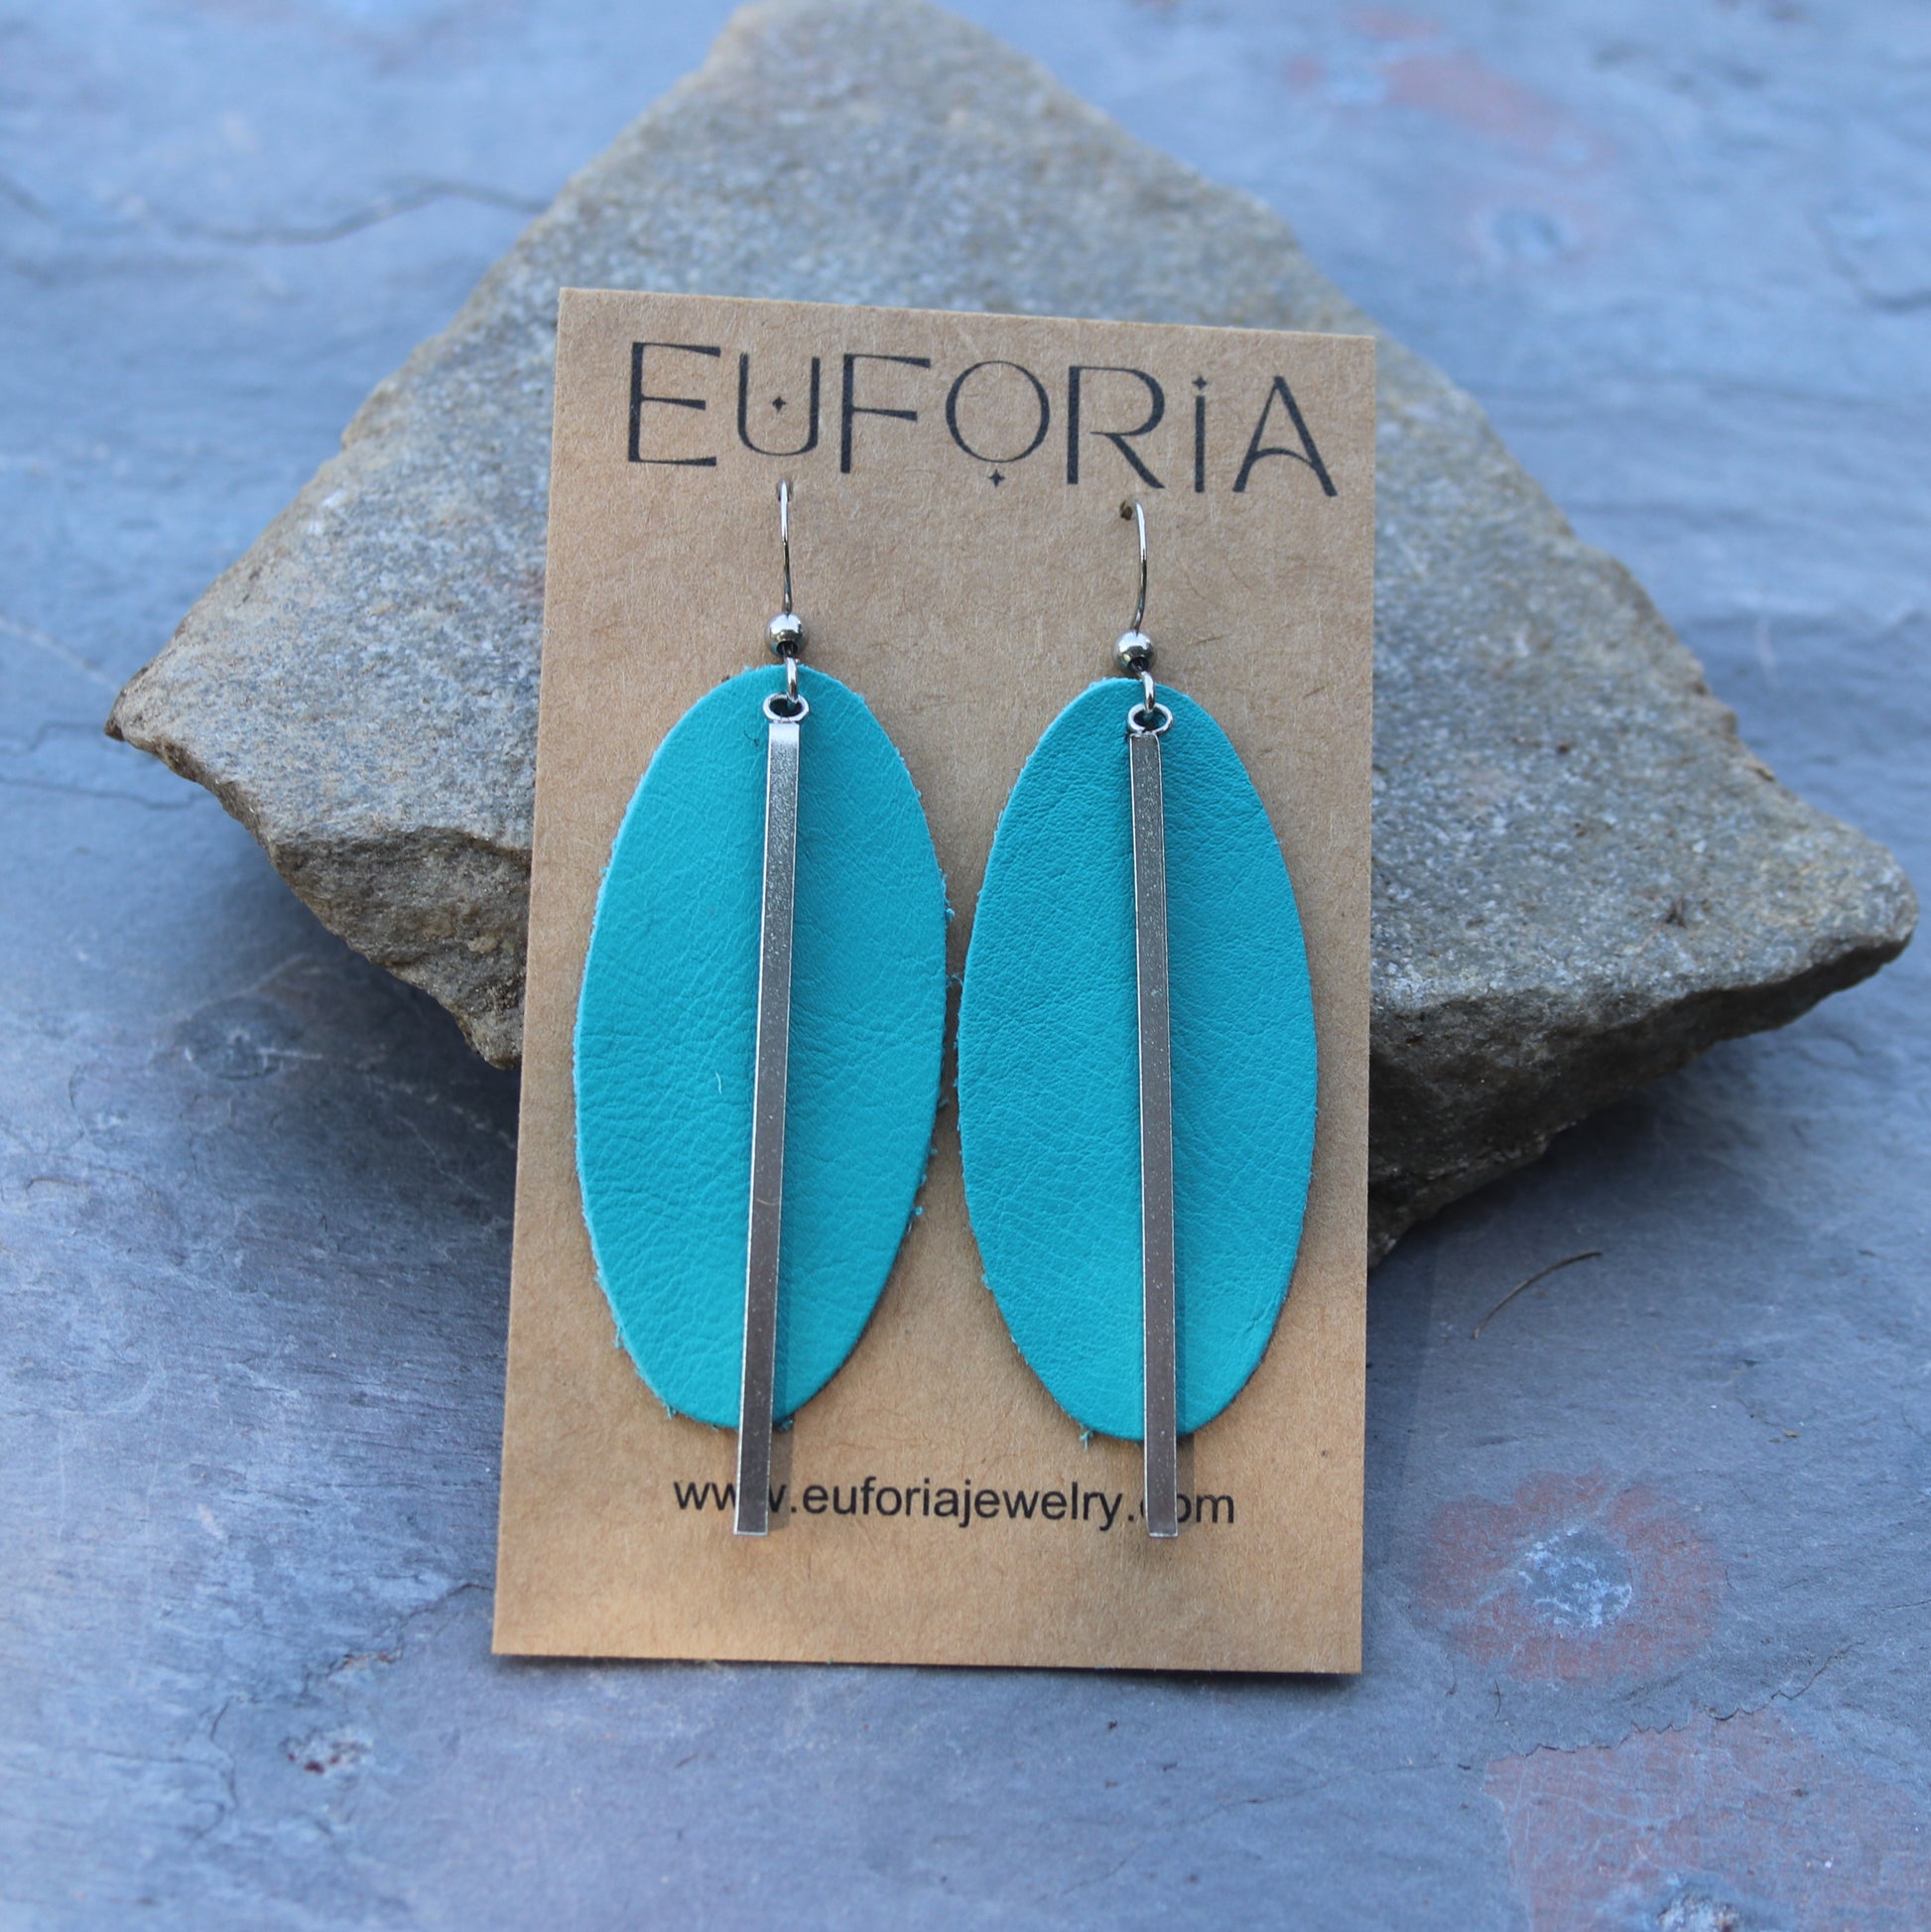 2" aqua leather oval with 2.25" stainless steel bar charm on stainless ear wires earrings.  